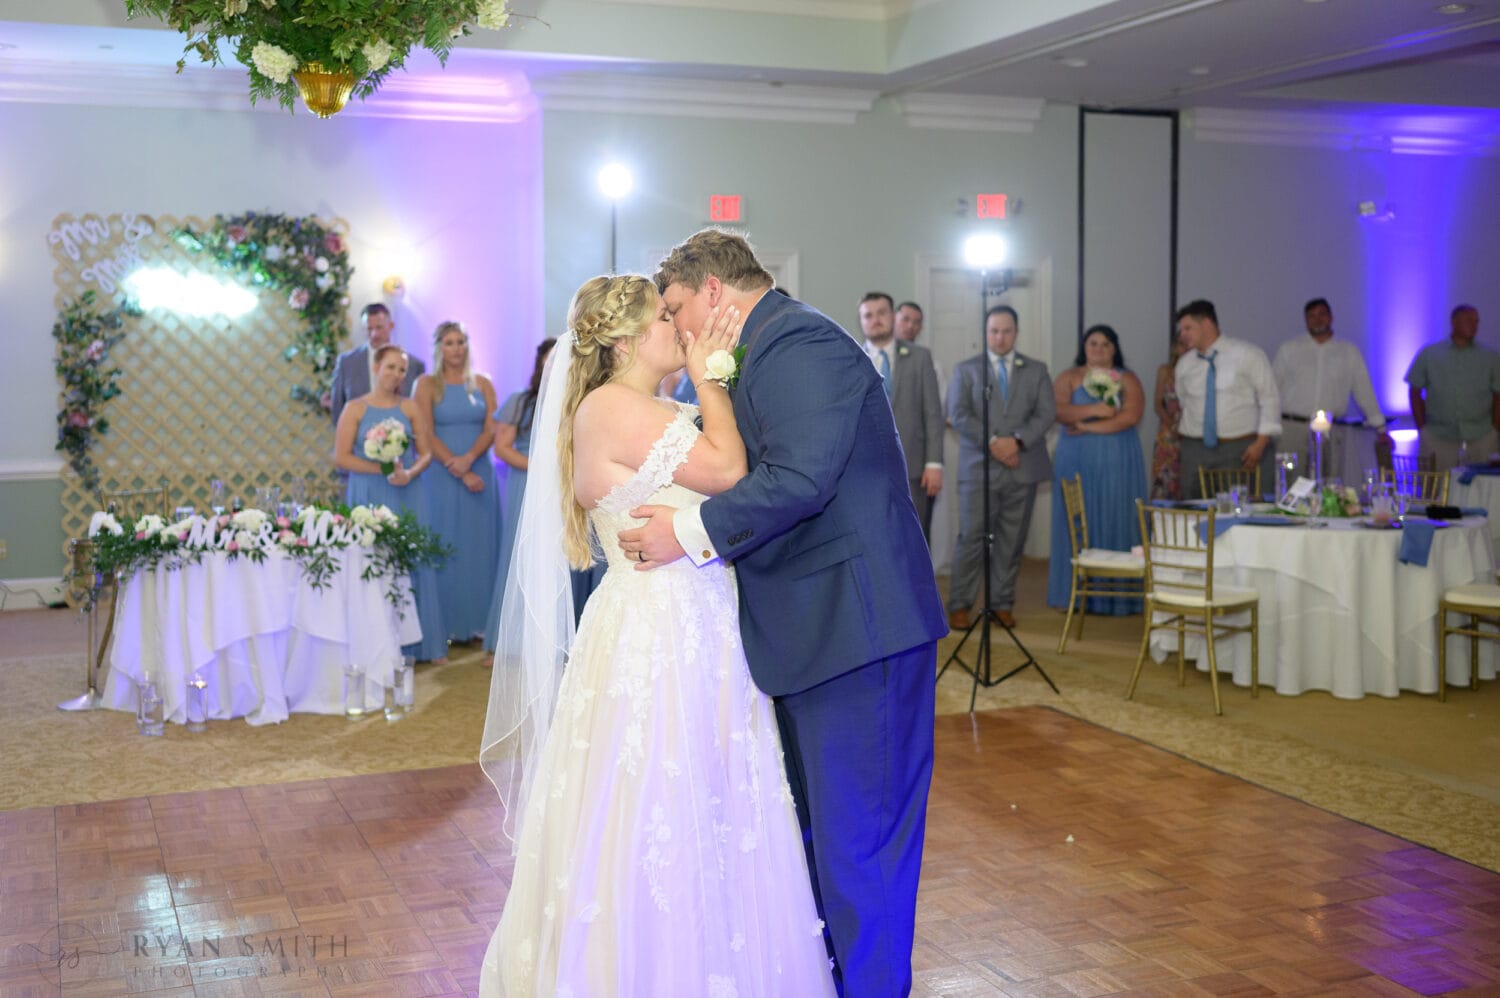 First dance with the bride and groom - Pawleys Plantation